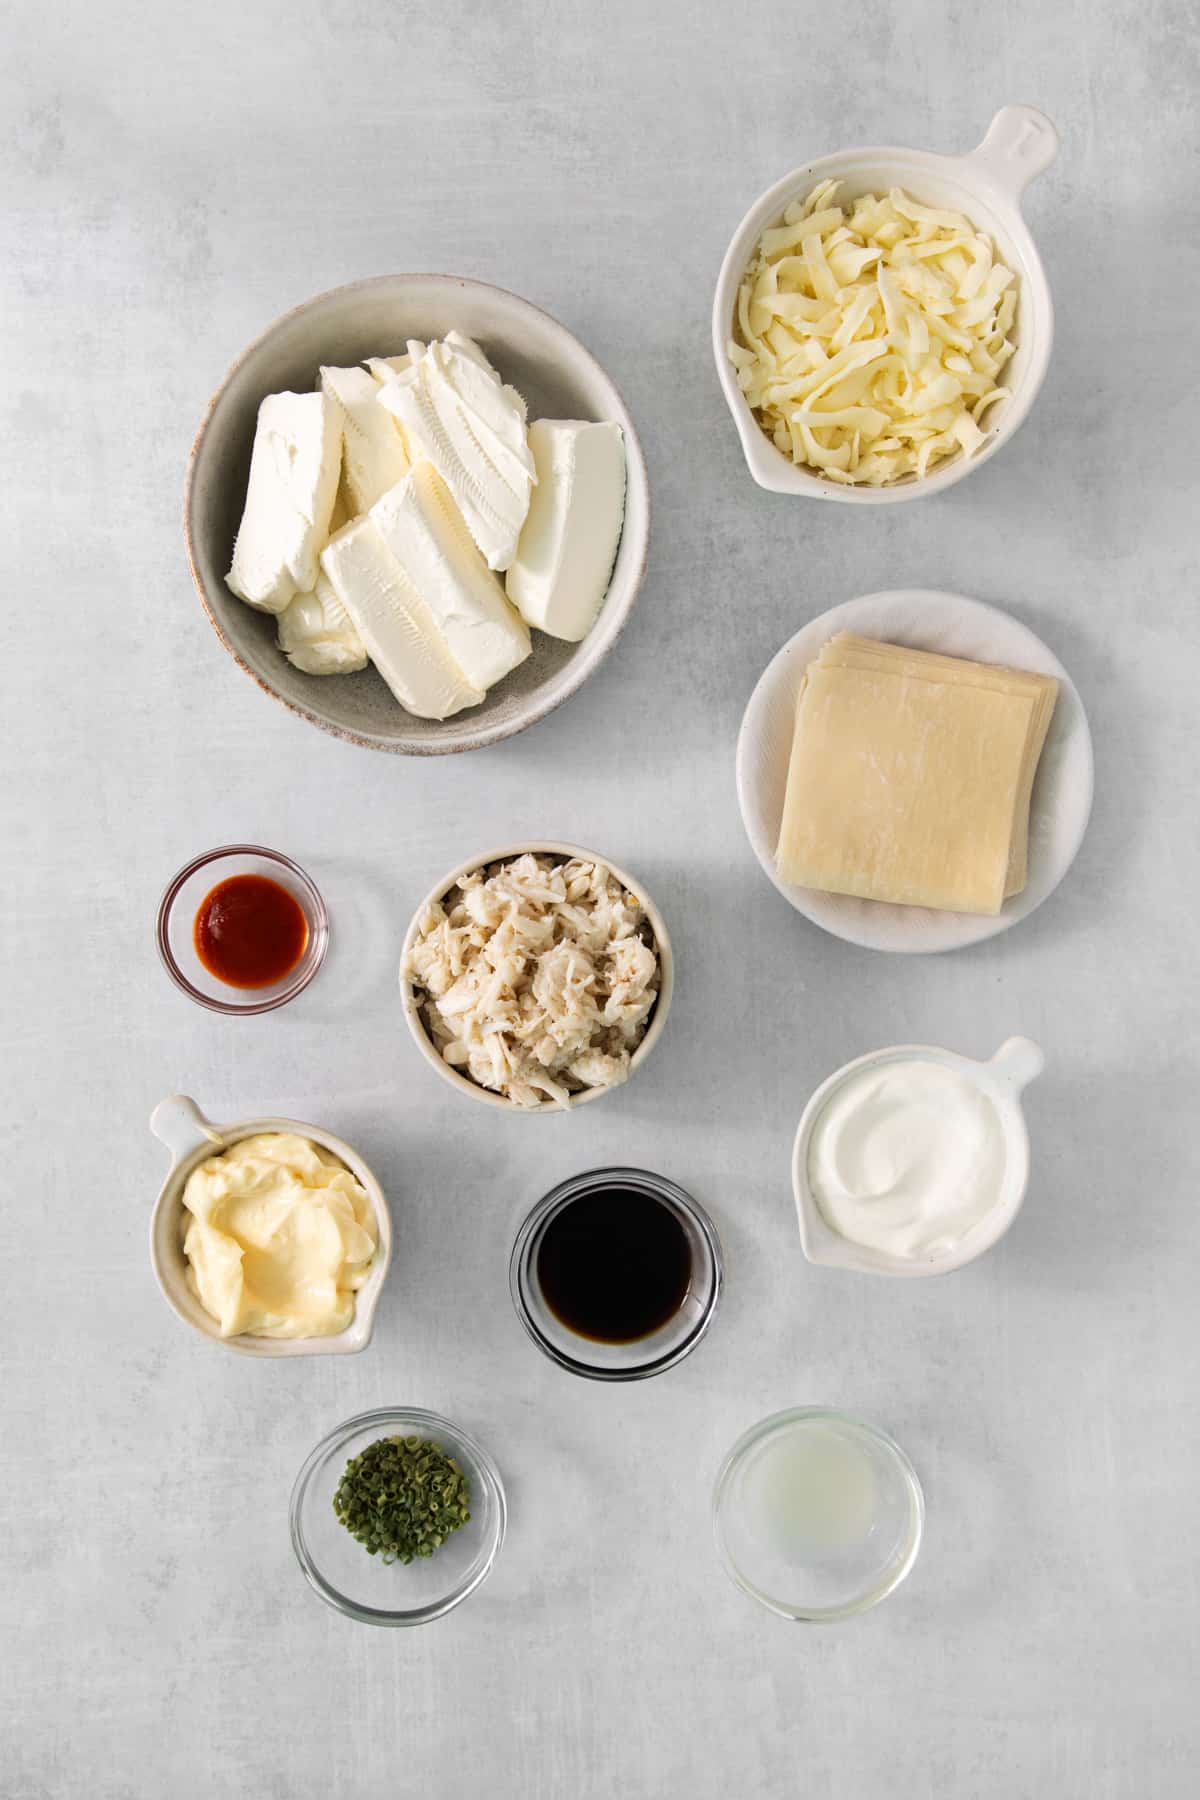 the ingredients for a cheesy tofu dish on a grey background.